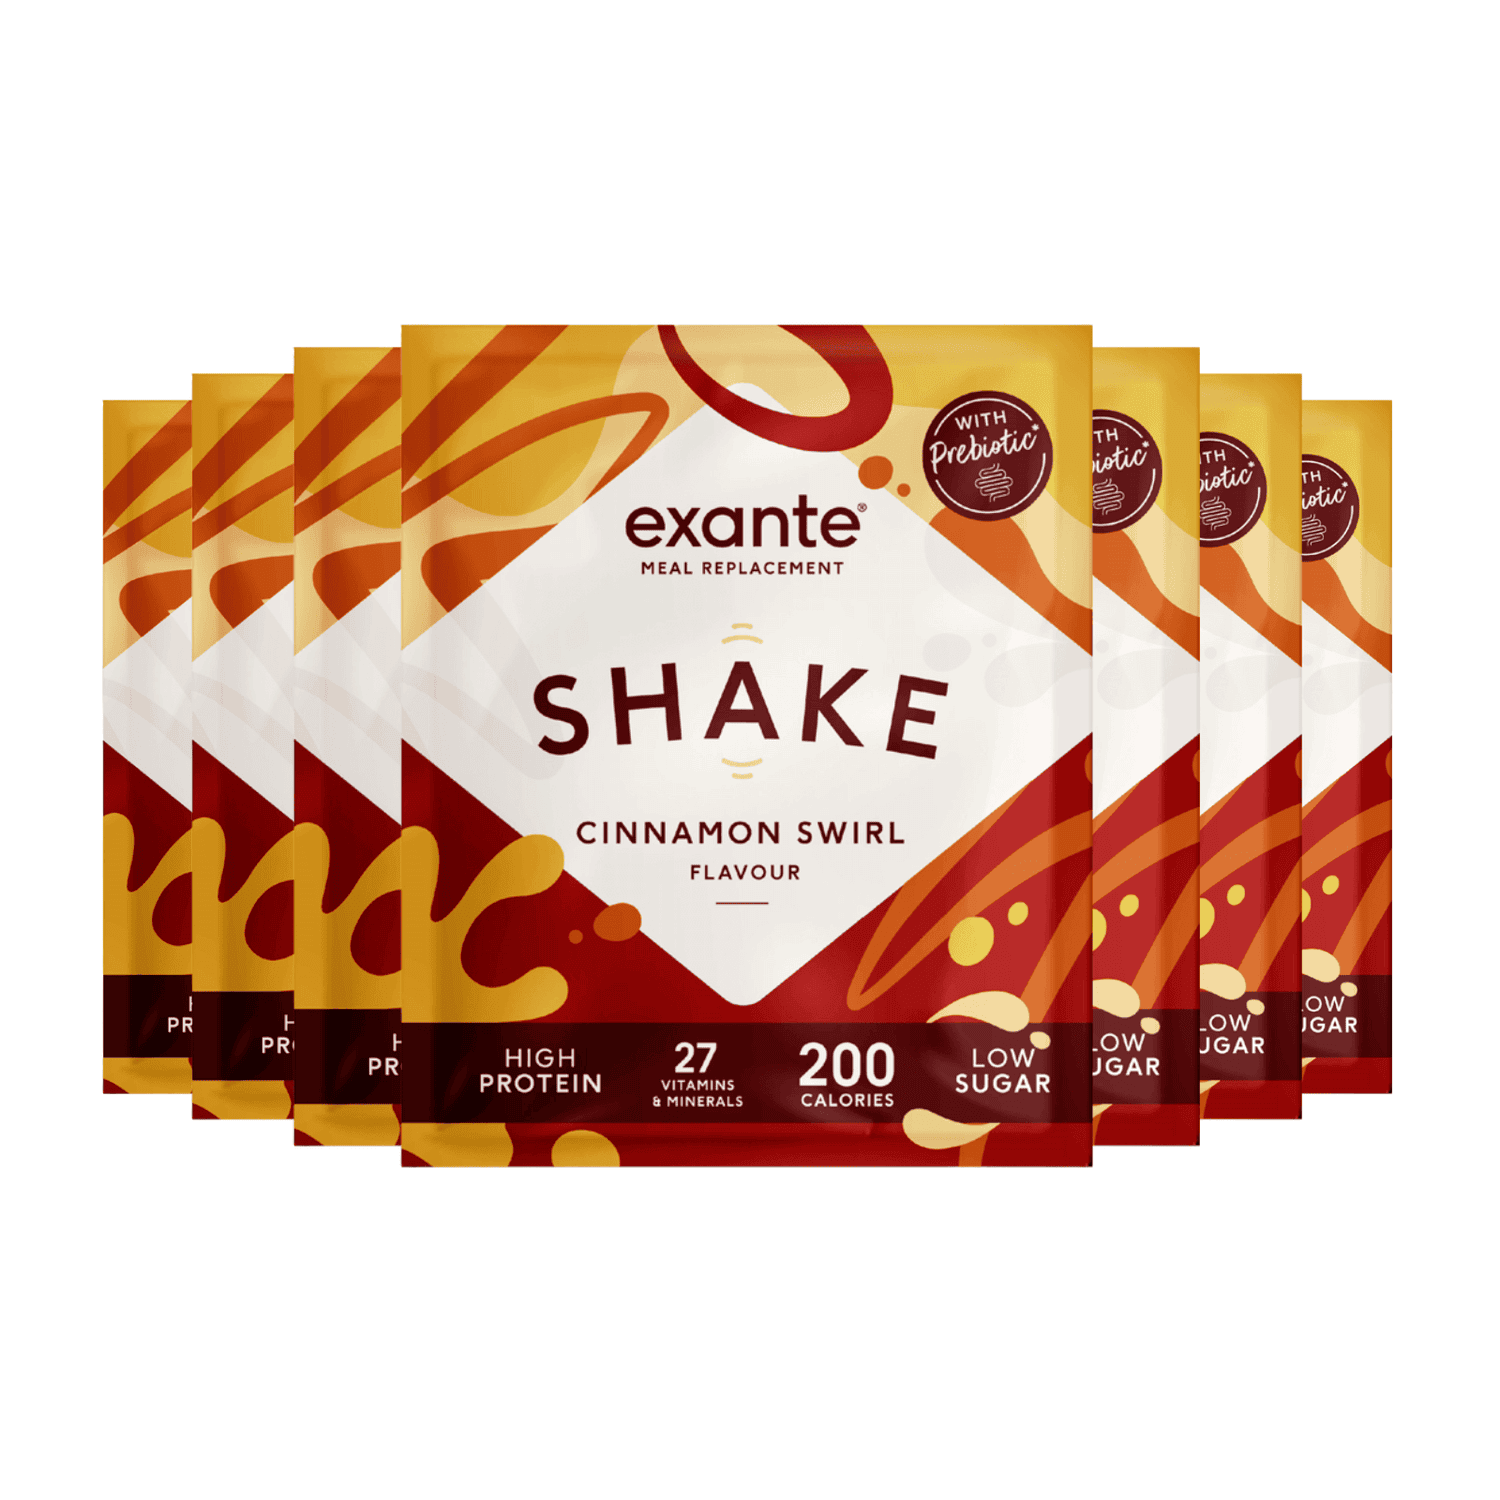 Exante Diet Meal Replacement Shake, Cinnamon Swirl, Box of 7